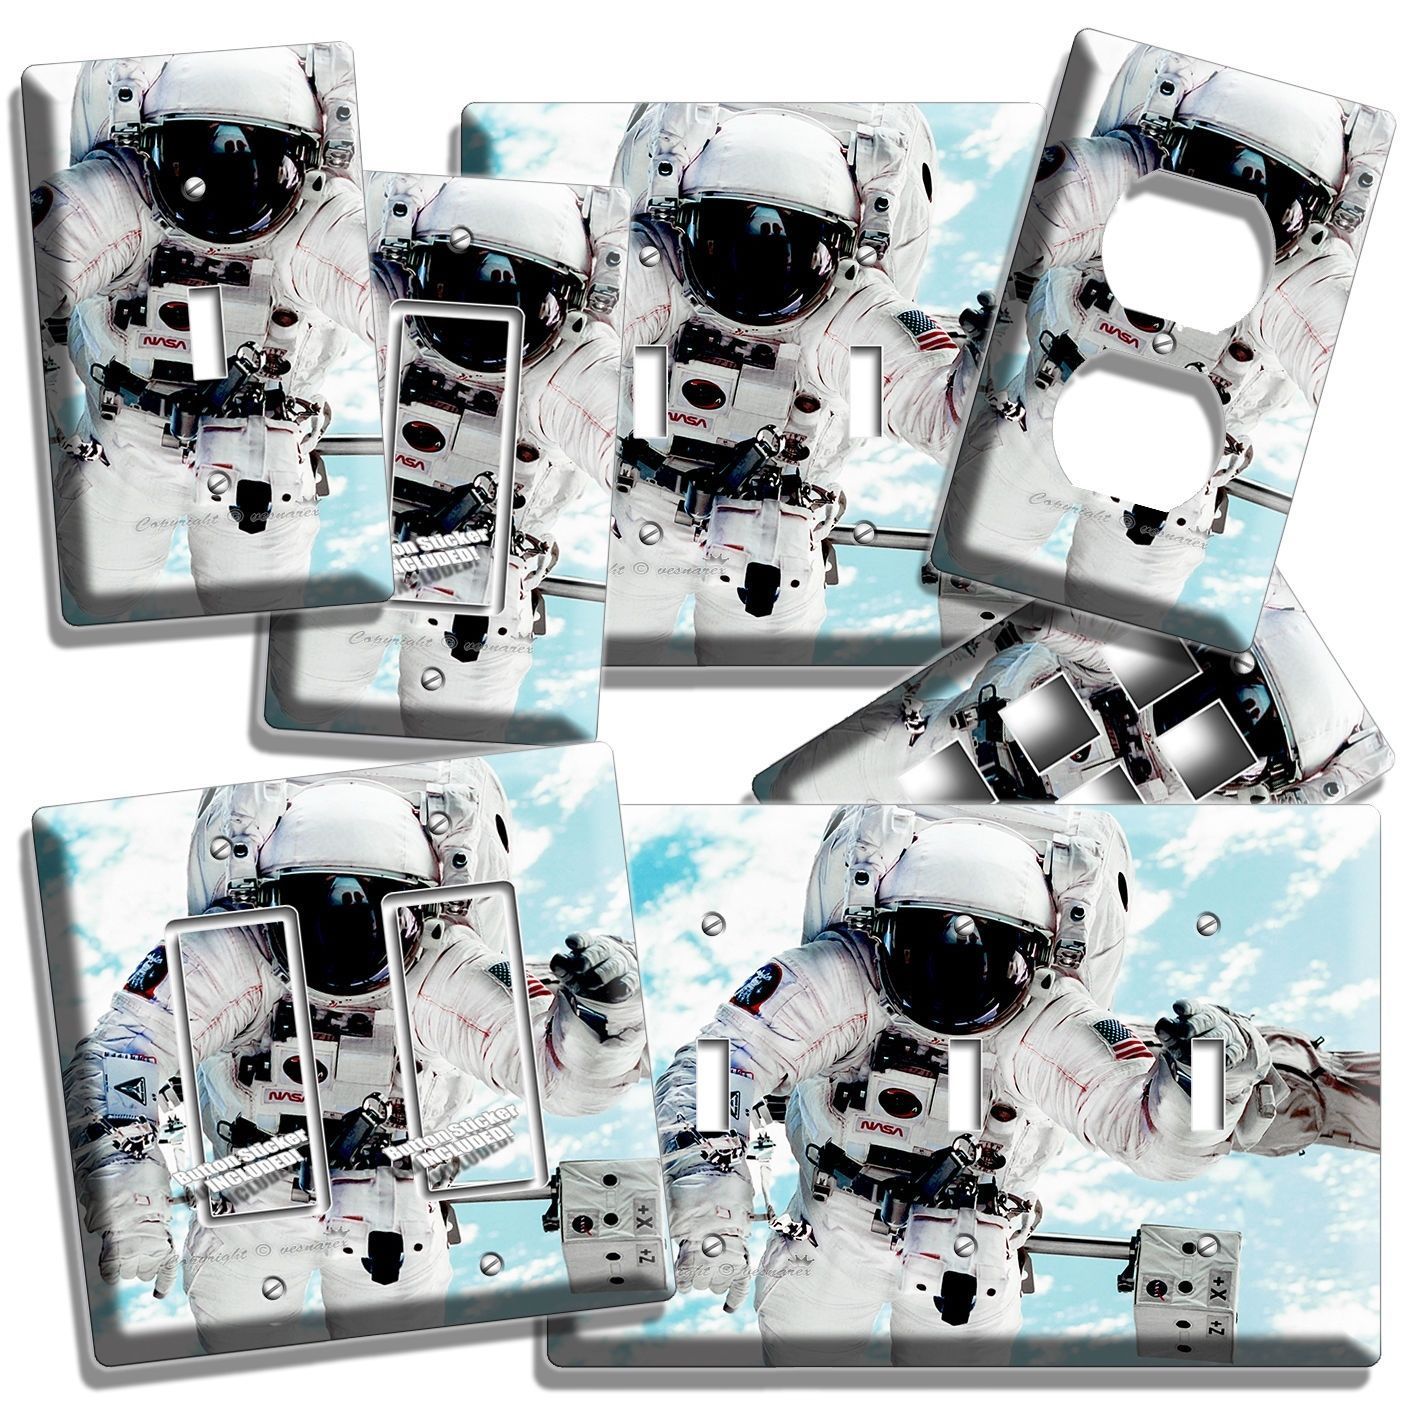 Primary image for OPEN SPACE NASA ASTRONAUT SWITCH WALL PLATE OUTLET HOME ROOM GEEK NERD ART DECOR